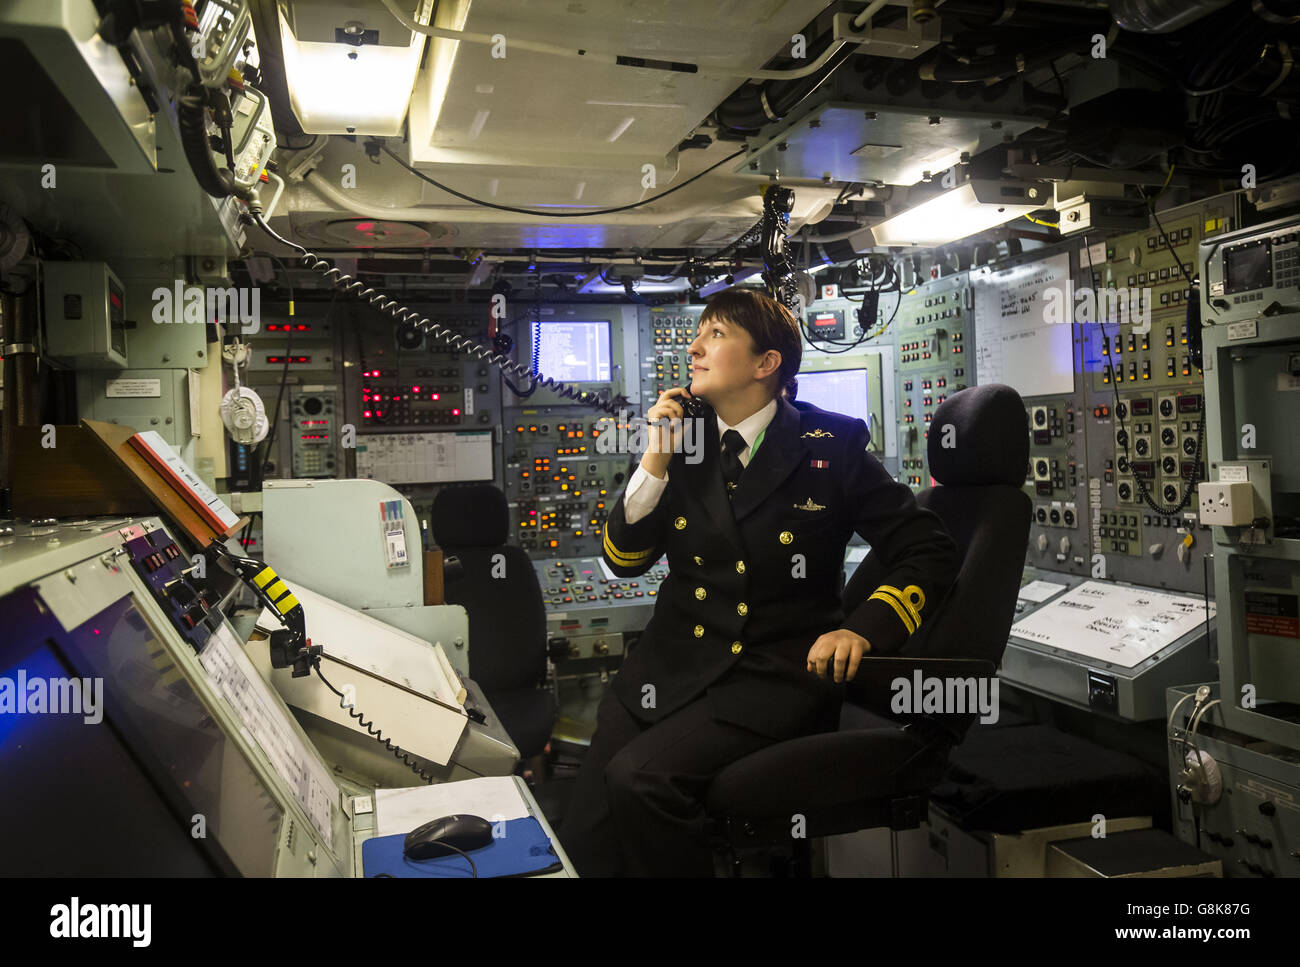 Lt Alexandra Olsson, the UK's first female submariner, in the control room on board Vanguard-class submarine HMS Vigilant, one of the UK's four nuclear warhead-carrying submarines, at HM Naval Base Clyde, also known as Faslane, ahead of a visit by Defence Secretary Michael Fallon. Stock Photo